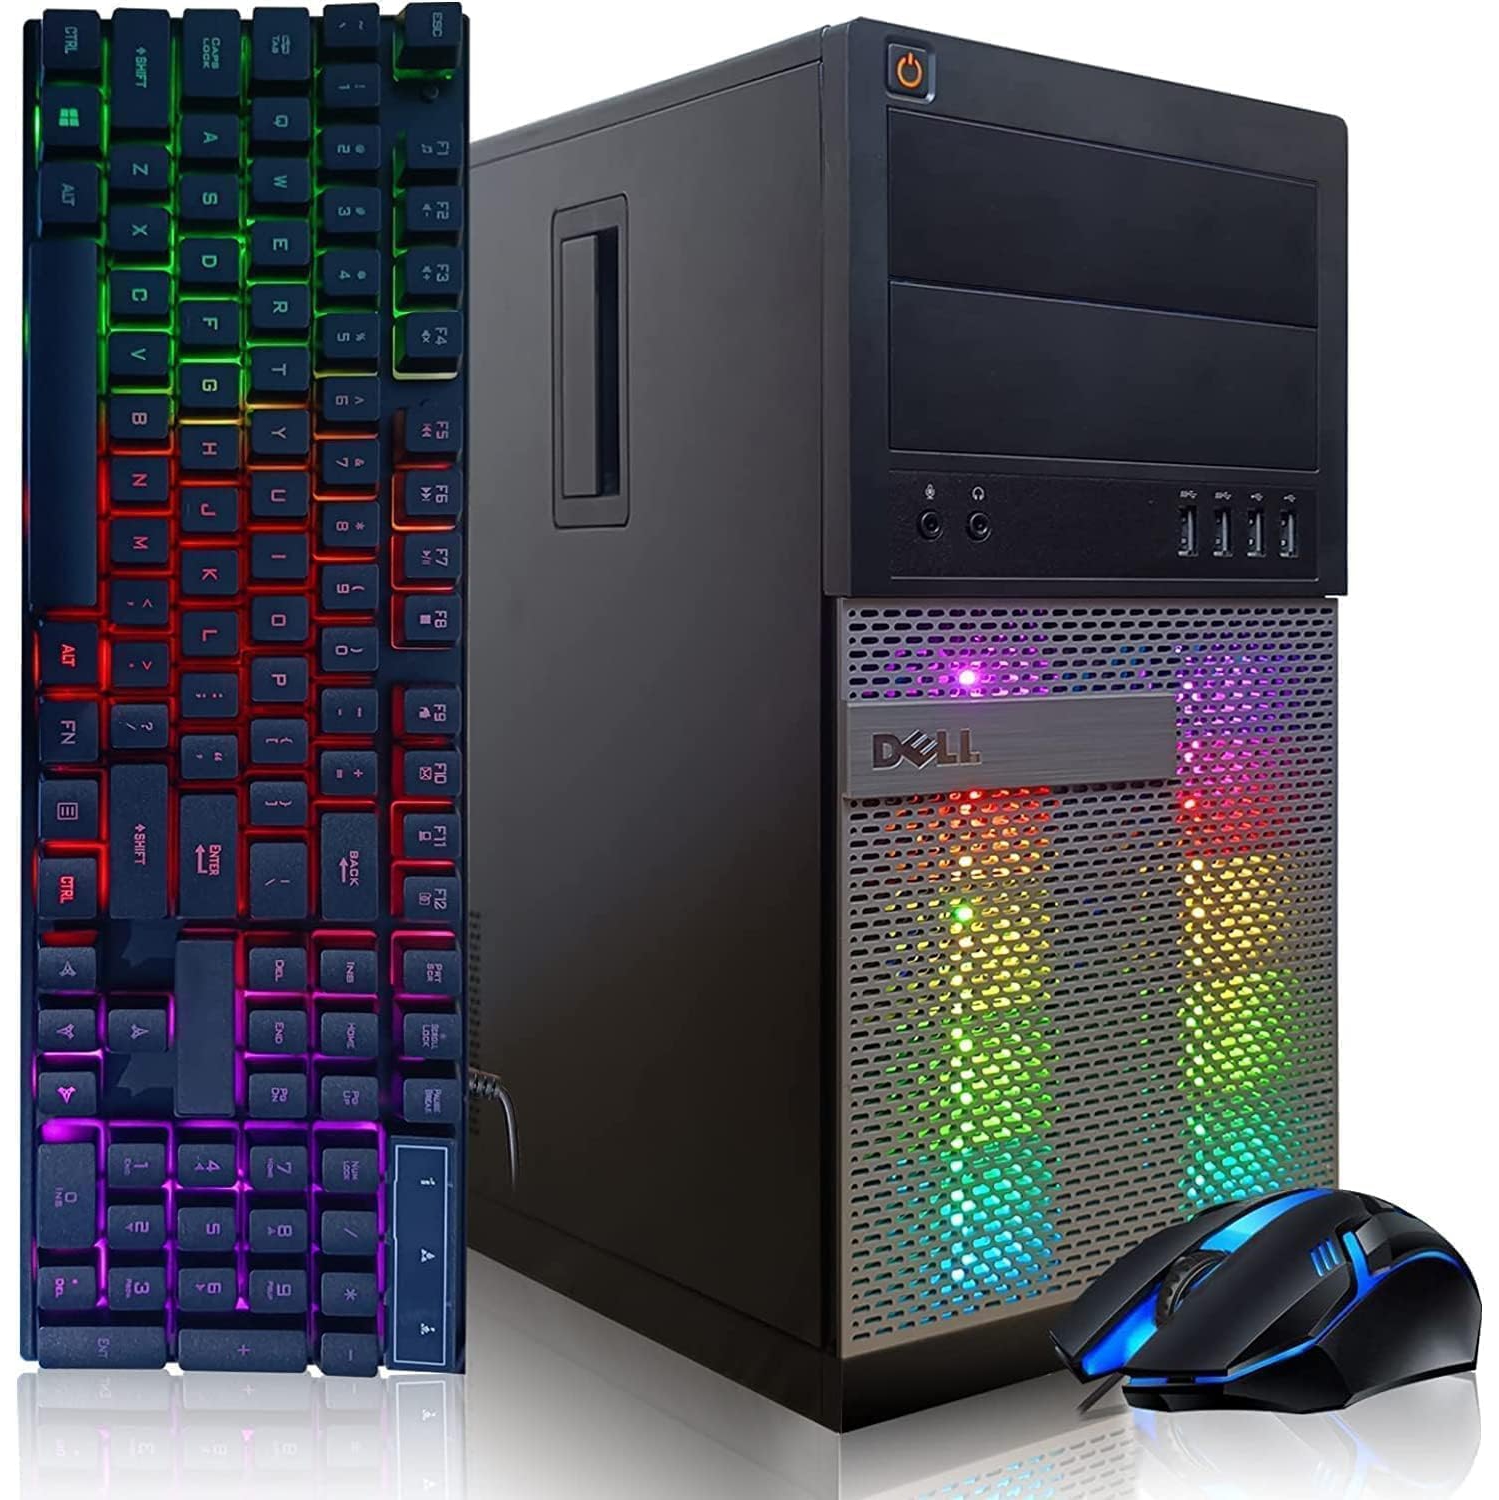 Refurbished (Excellent) DELL RGB Gaming Desktop Computer, Intel Quad Core I7 up to 3.8GHz, Radeon RX 550 4G, 16GB Memory, 1T SSD, Keyboard & Mouse, 600M WiFi Bluetooth, Win 10 Pro